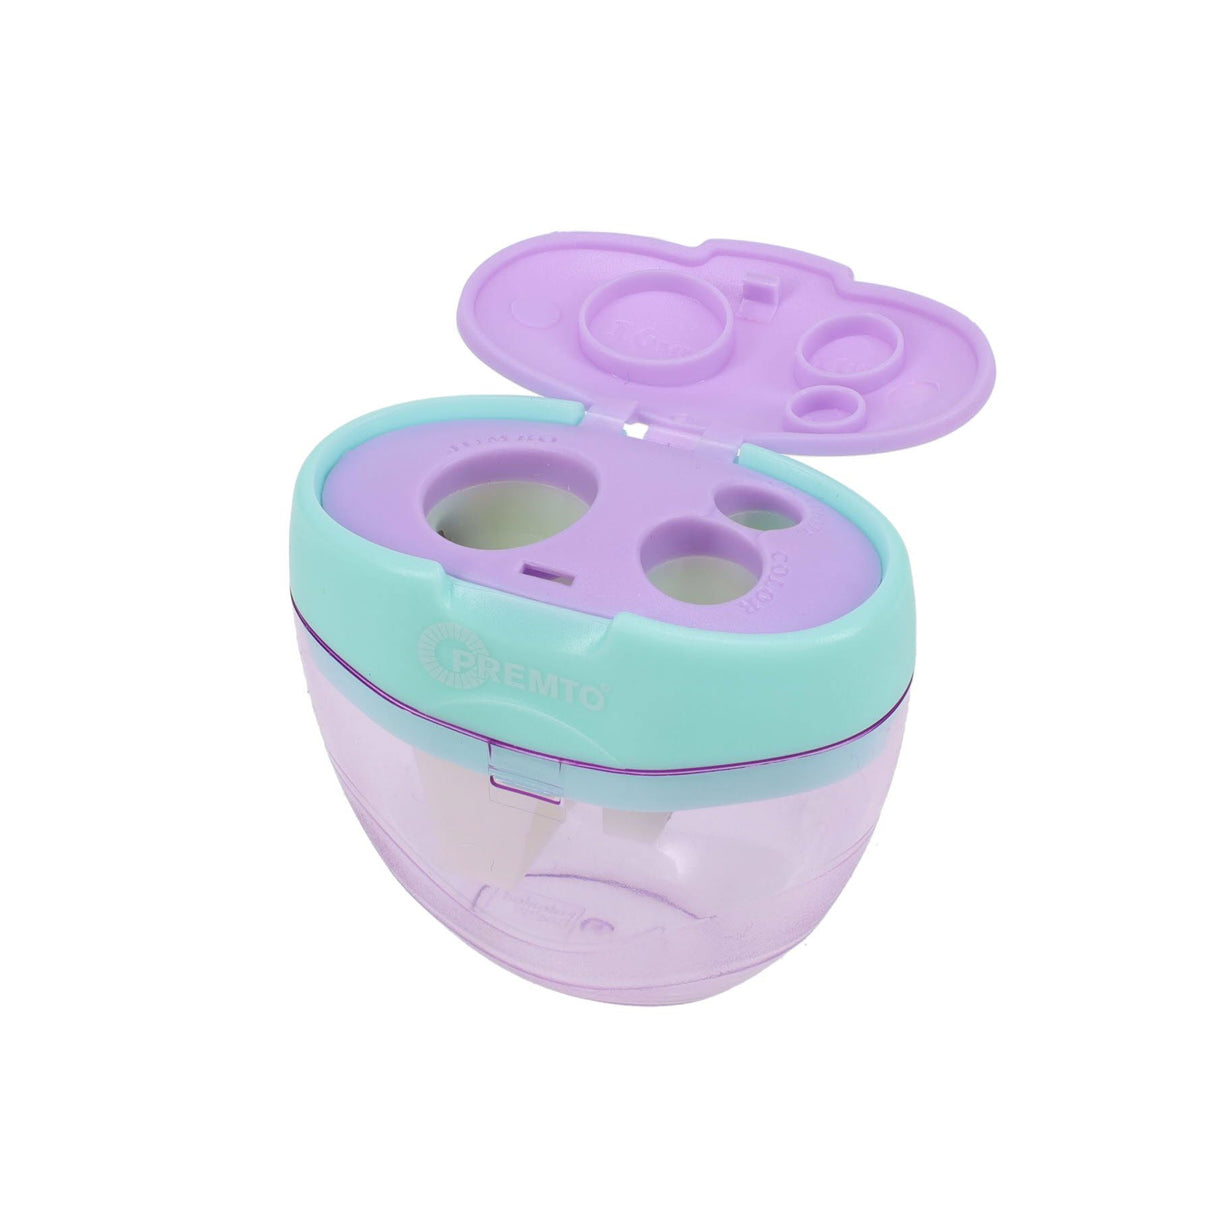 Premto Pastel Three Hole Sharpener - Mint Magic and Wild Orchid | Stationery Shop UK